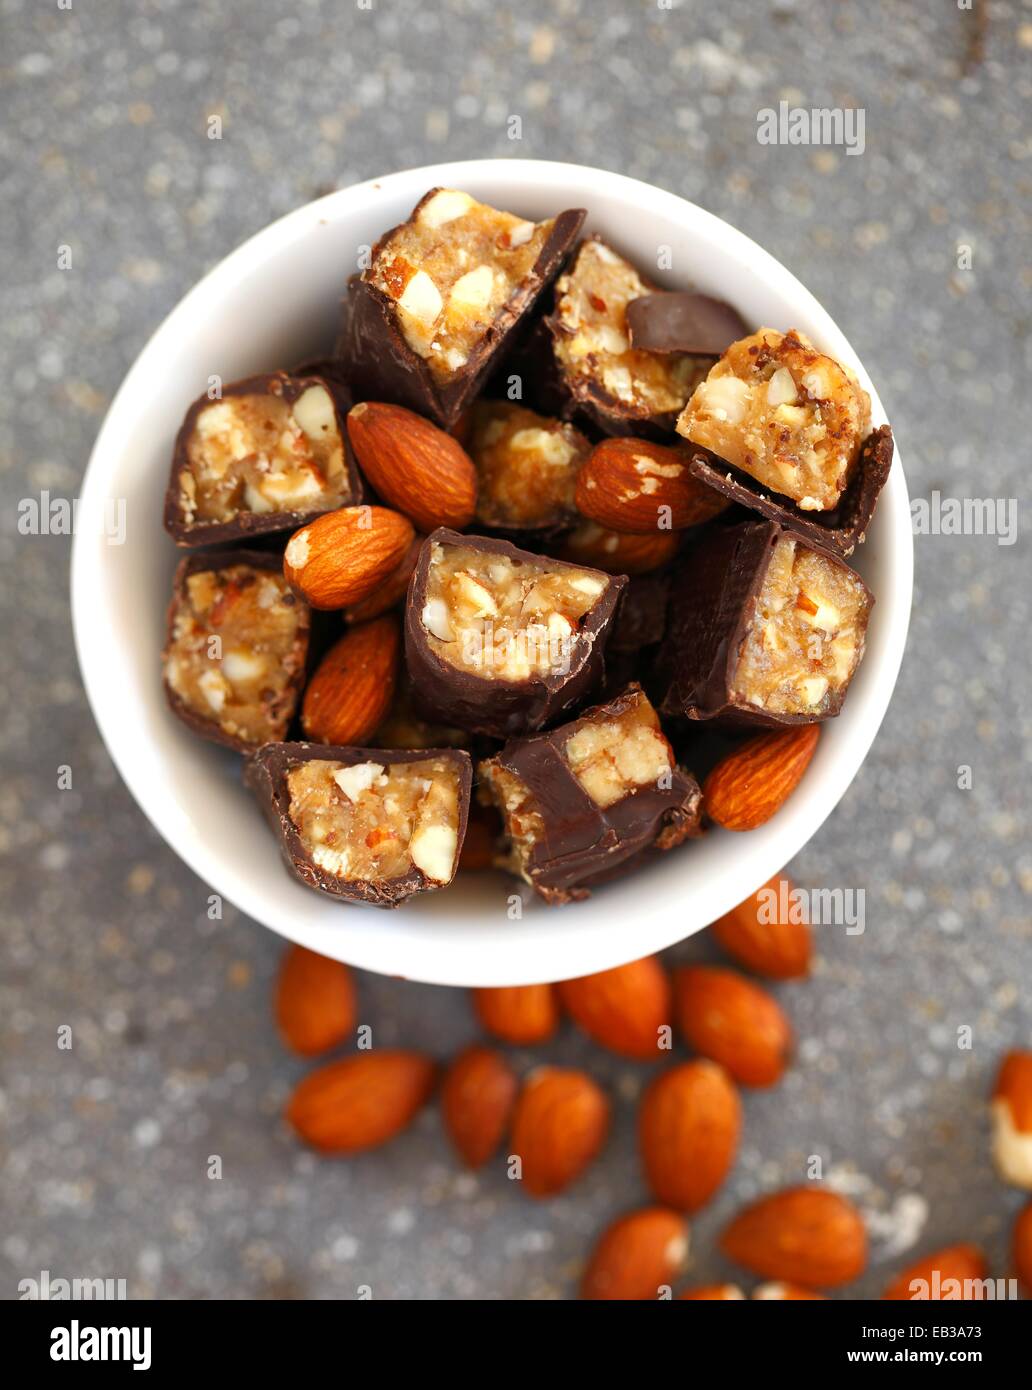 Chocolate candy bars cut into pieces mixed with whole almonds in white porcelain bowl Stock Photo